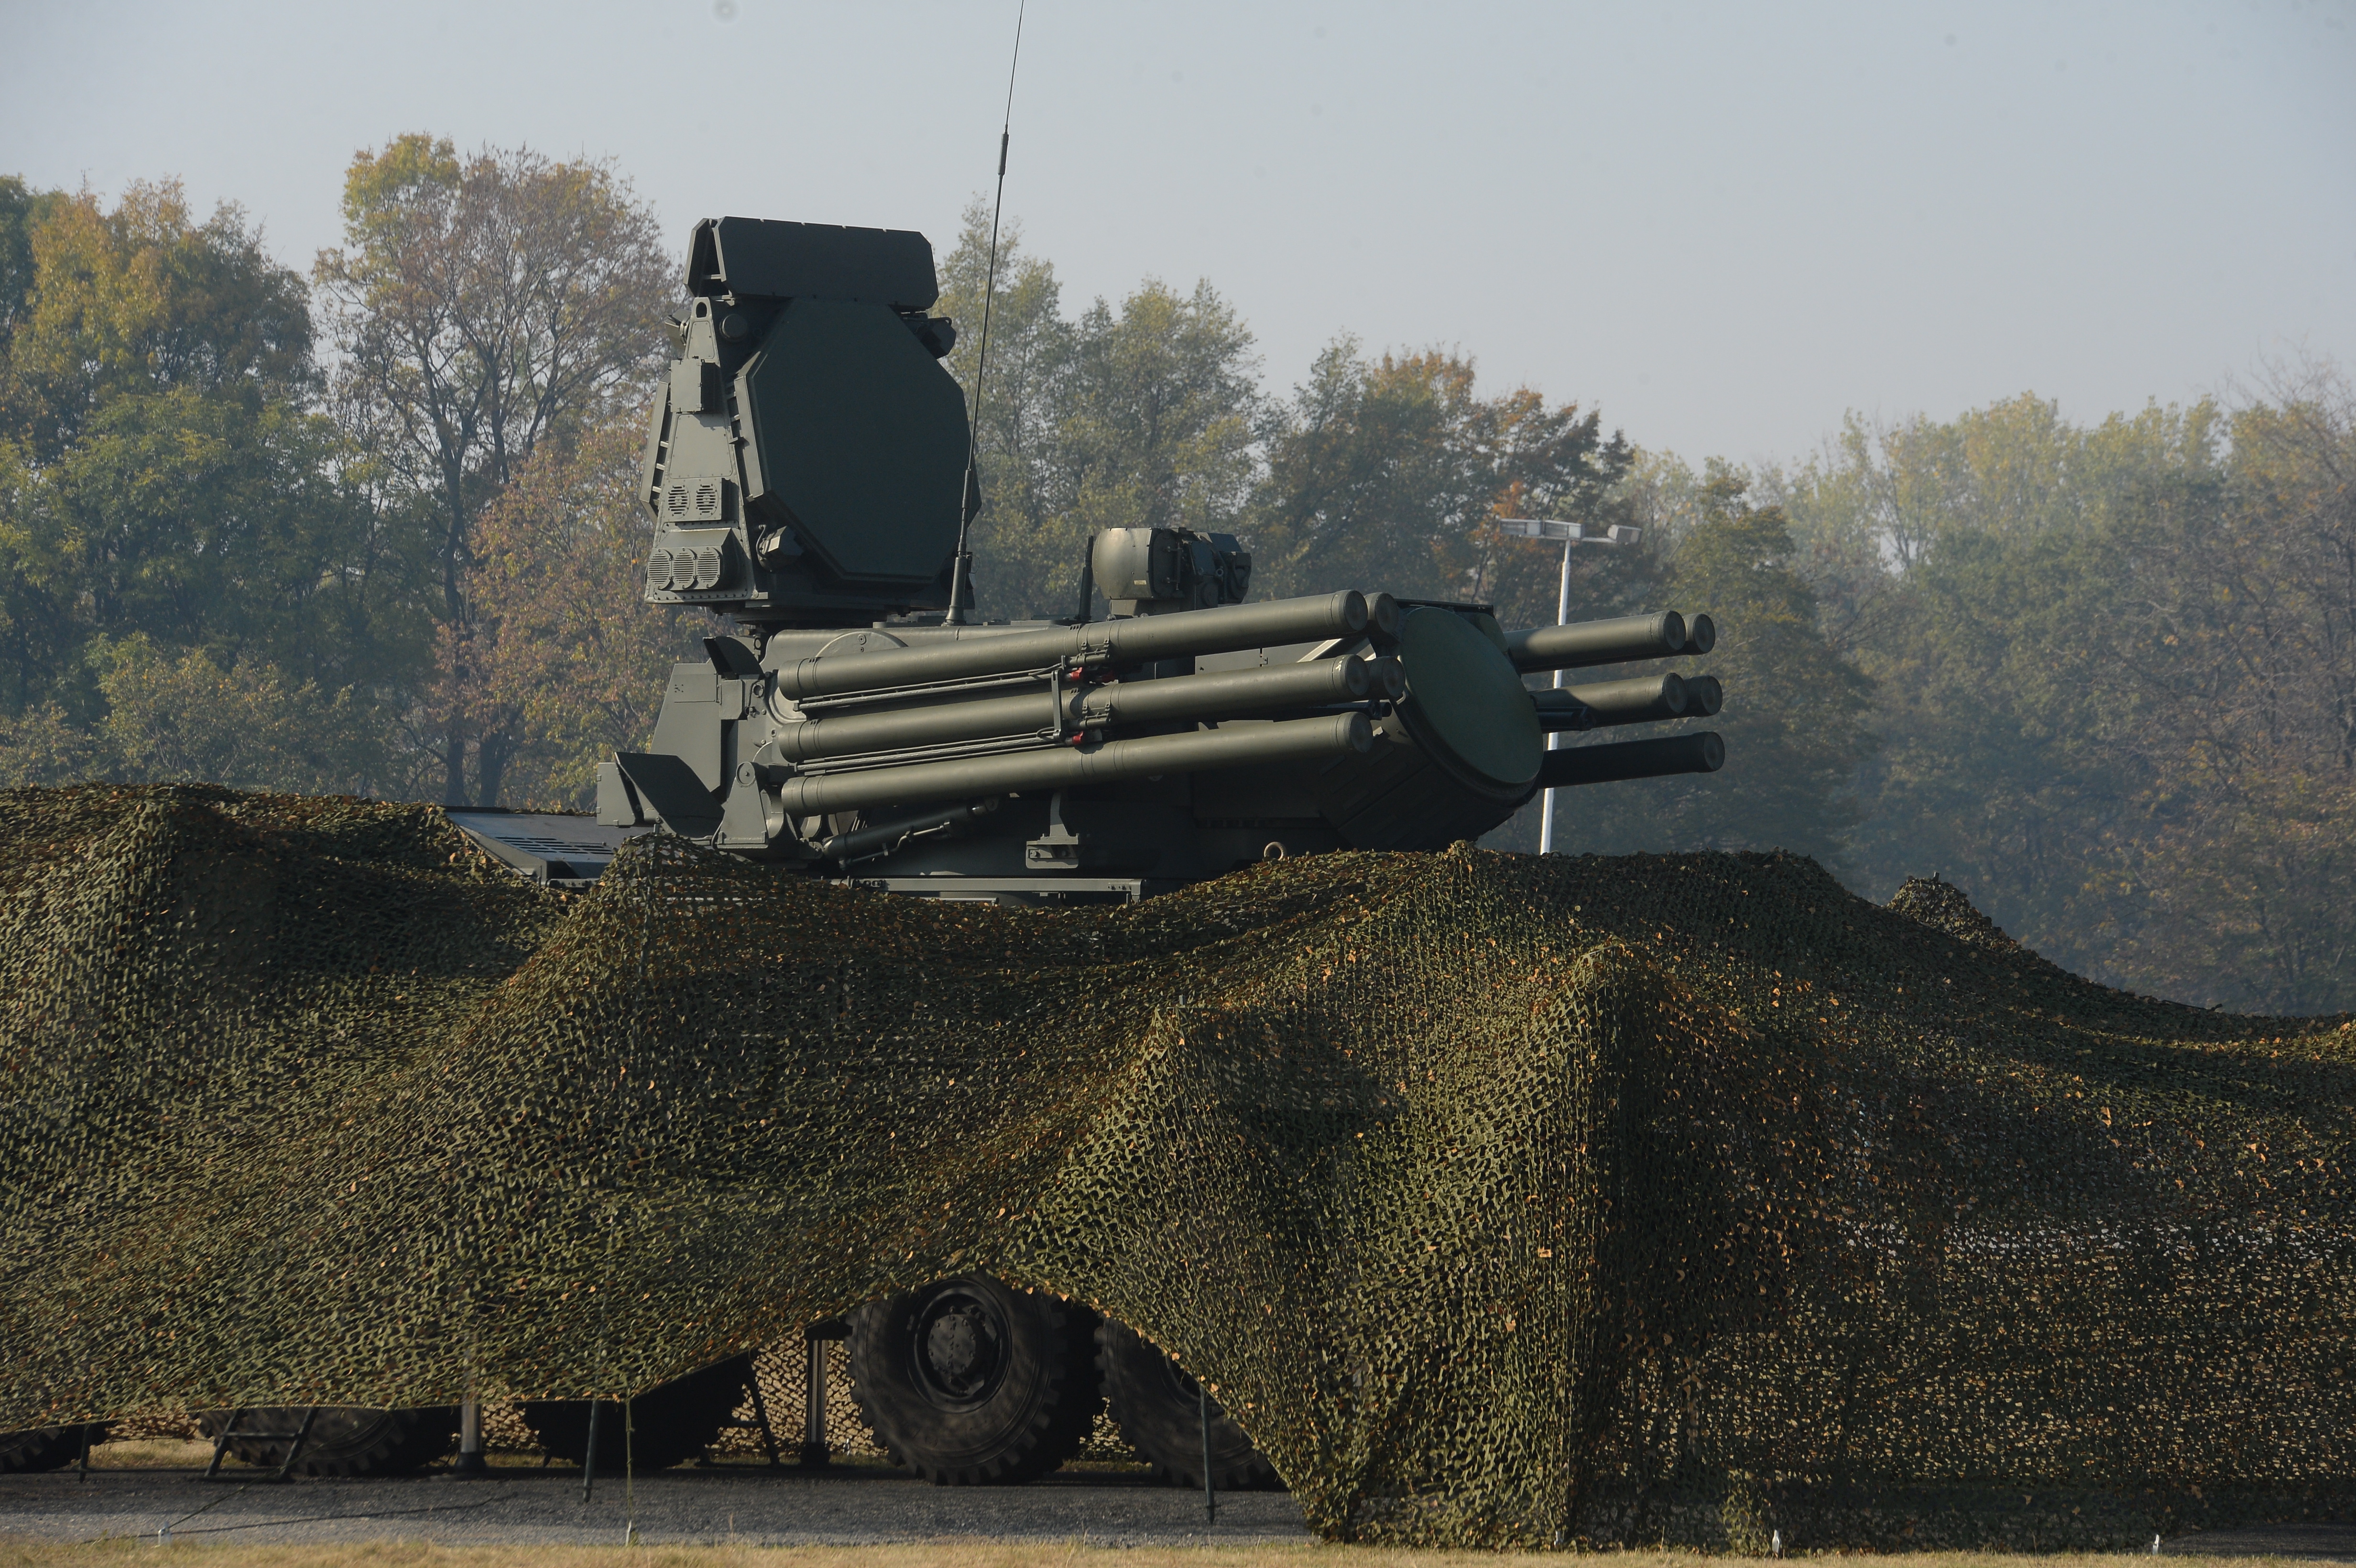 epa07948954 A handout photo made available by the Serbian Presidency shows a Pantsir-S anti-aircraft missile and gun system during the joint Serbia-Russia military exercise at the Batajnica military airport near Belgrade Serbia, 25 October 2019. Russian air defense units with S-400 anti-aircraft missile systems and the Pantsir-S anti-aircraft missile and gun systems were deployed by Russian military transport aircraft to the territory of Serbia to participate in the second stage of the joint Russian-Serbian air defense exercises Slavic Shield - 2019.  EPA/SERBIAN PRESIDENCY HANDOUT  HANDOUT EDITORIAL USE ONLY/NO SALES